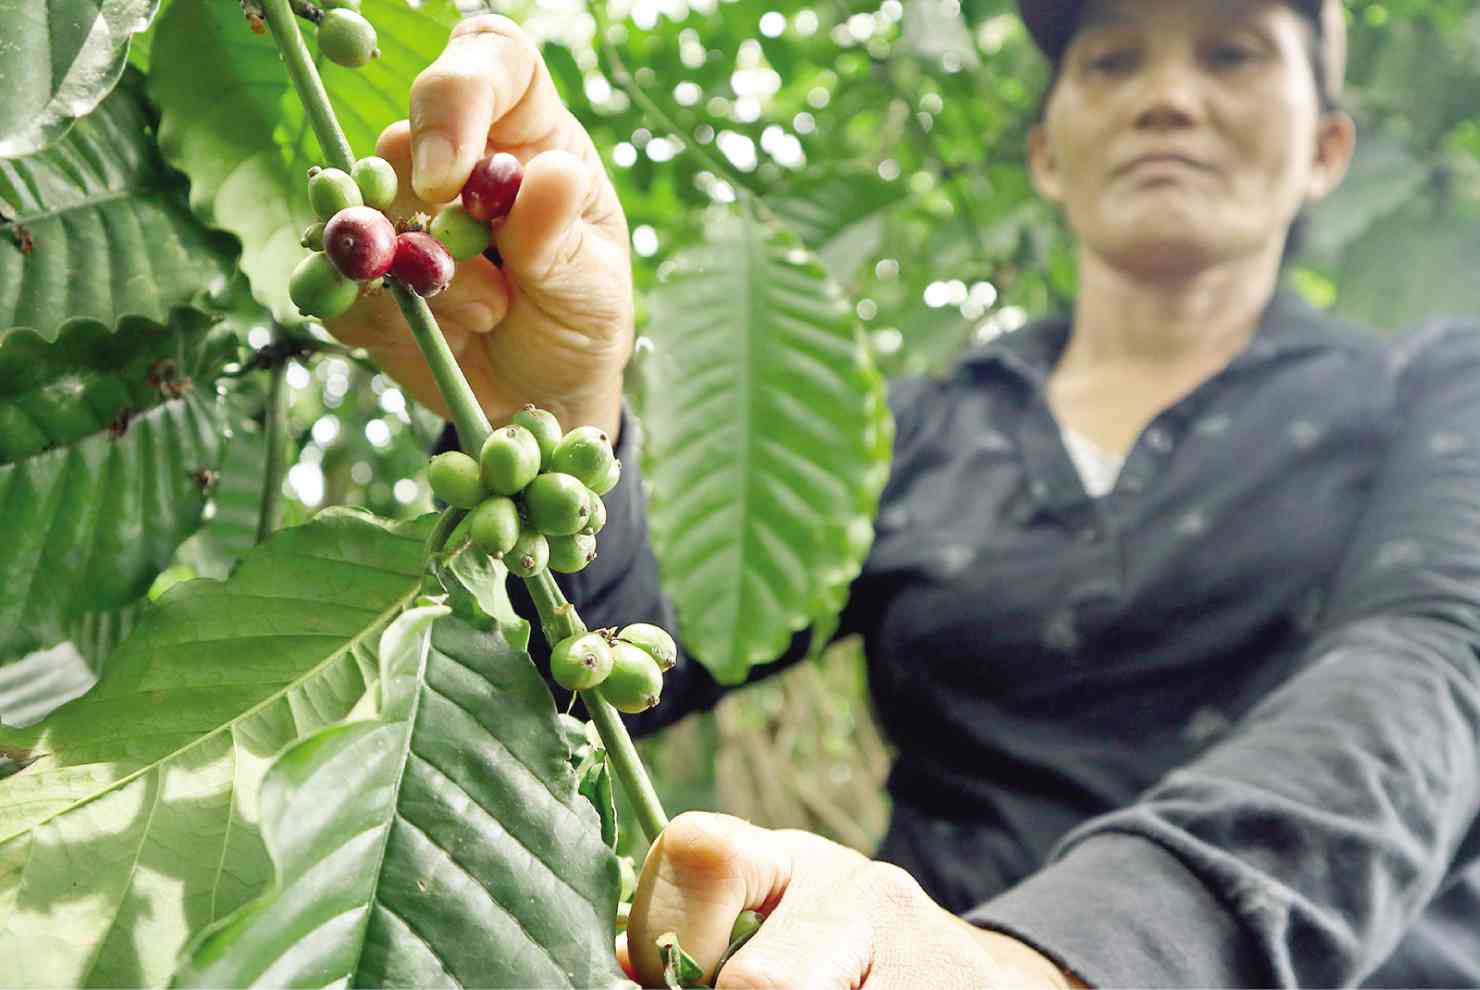 Coffee conundrum: Consumption up but trade prices low